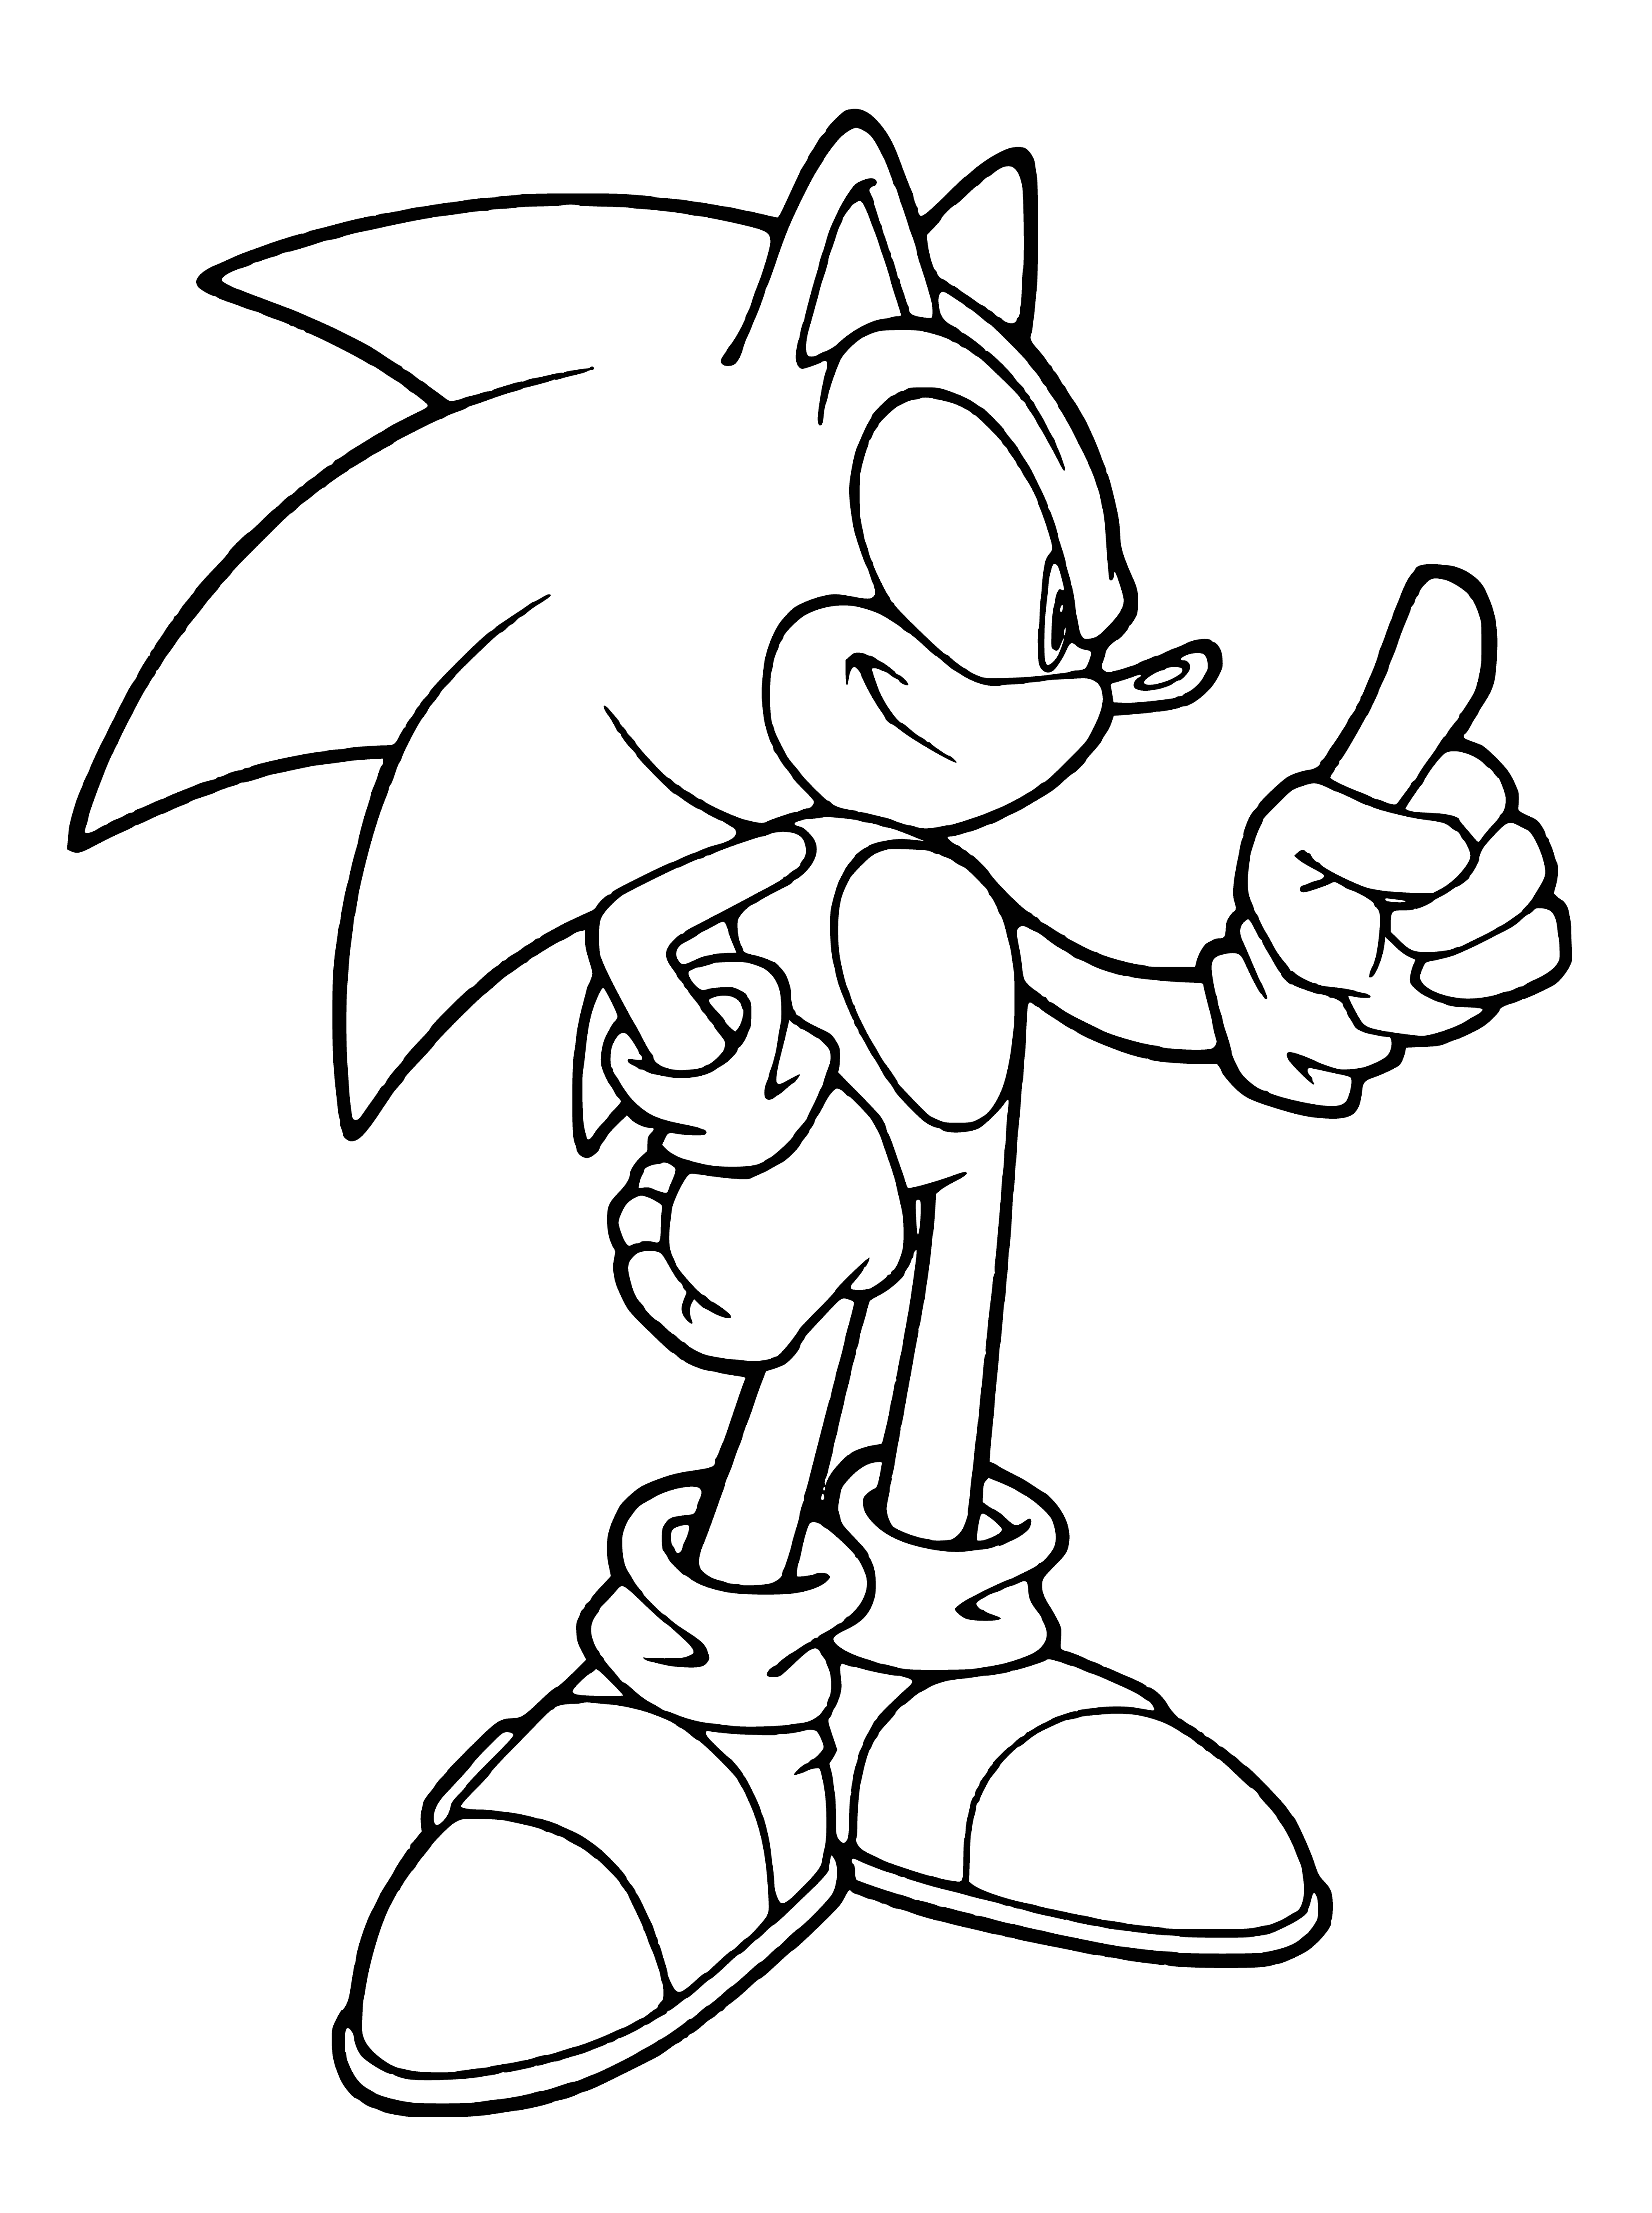 coloring page: Sonic X is a blue hedgehog with open mouth & white teeth, wearing red shoes & gold ring running with right arm outstretched.